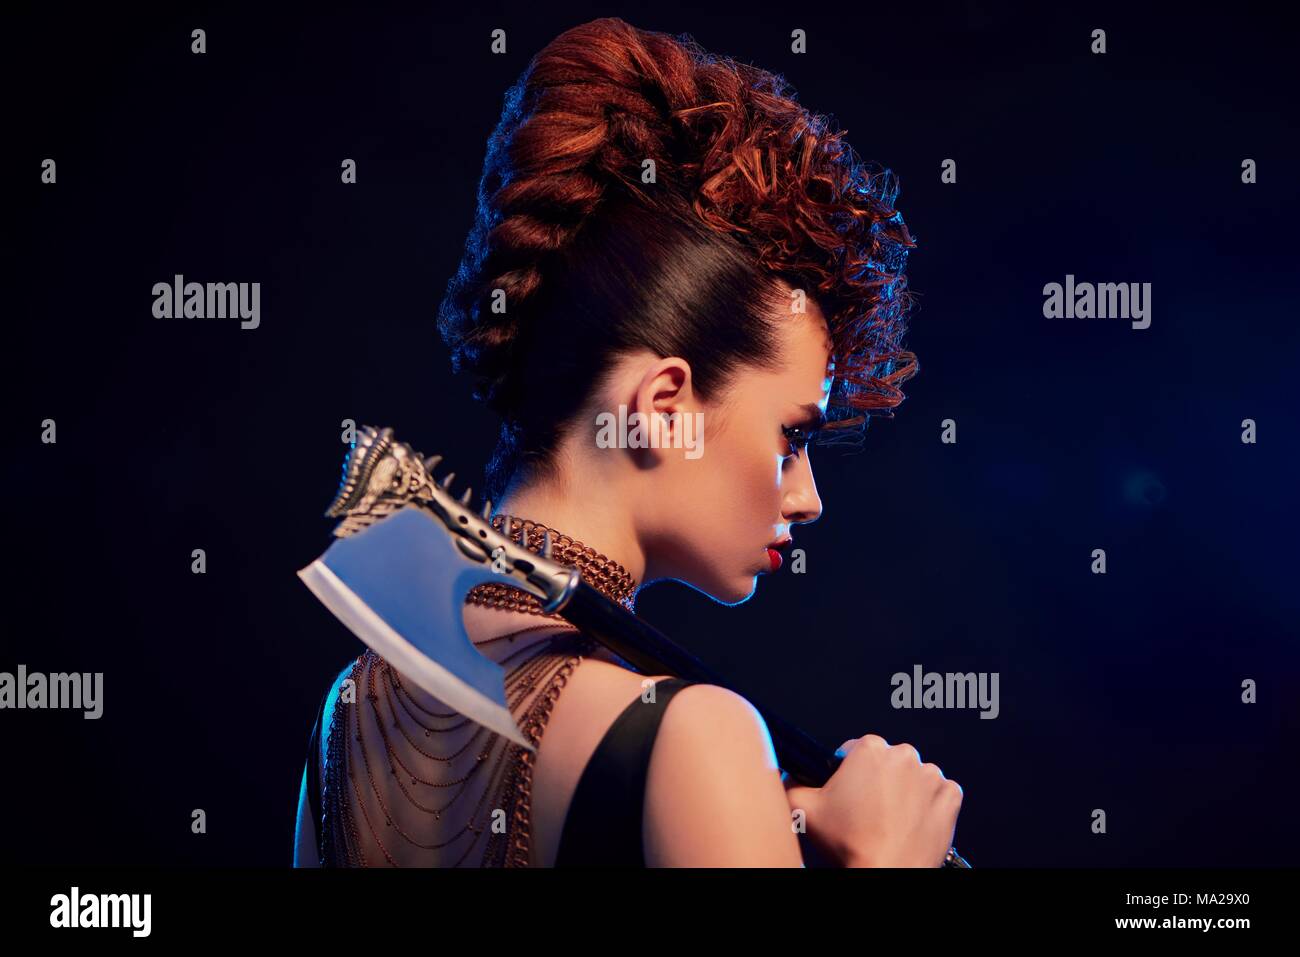 Back view of young beatiful warrior girl keeping sharp metallic axe with thorns. Model wears bright original make up and fashionable, stylish hairdress. Golden chains with crosses on neck. Stock Photo